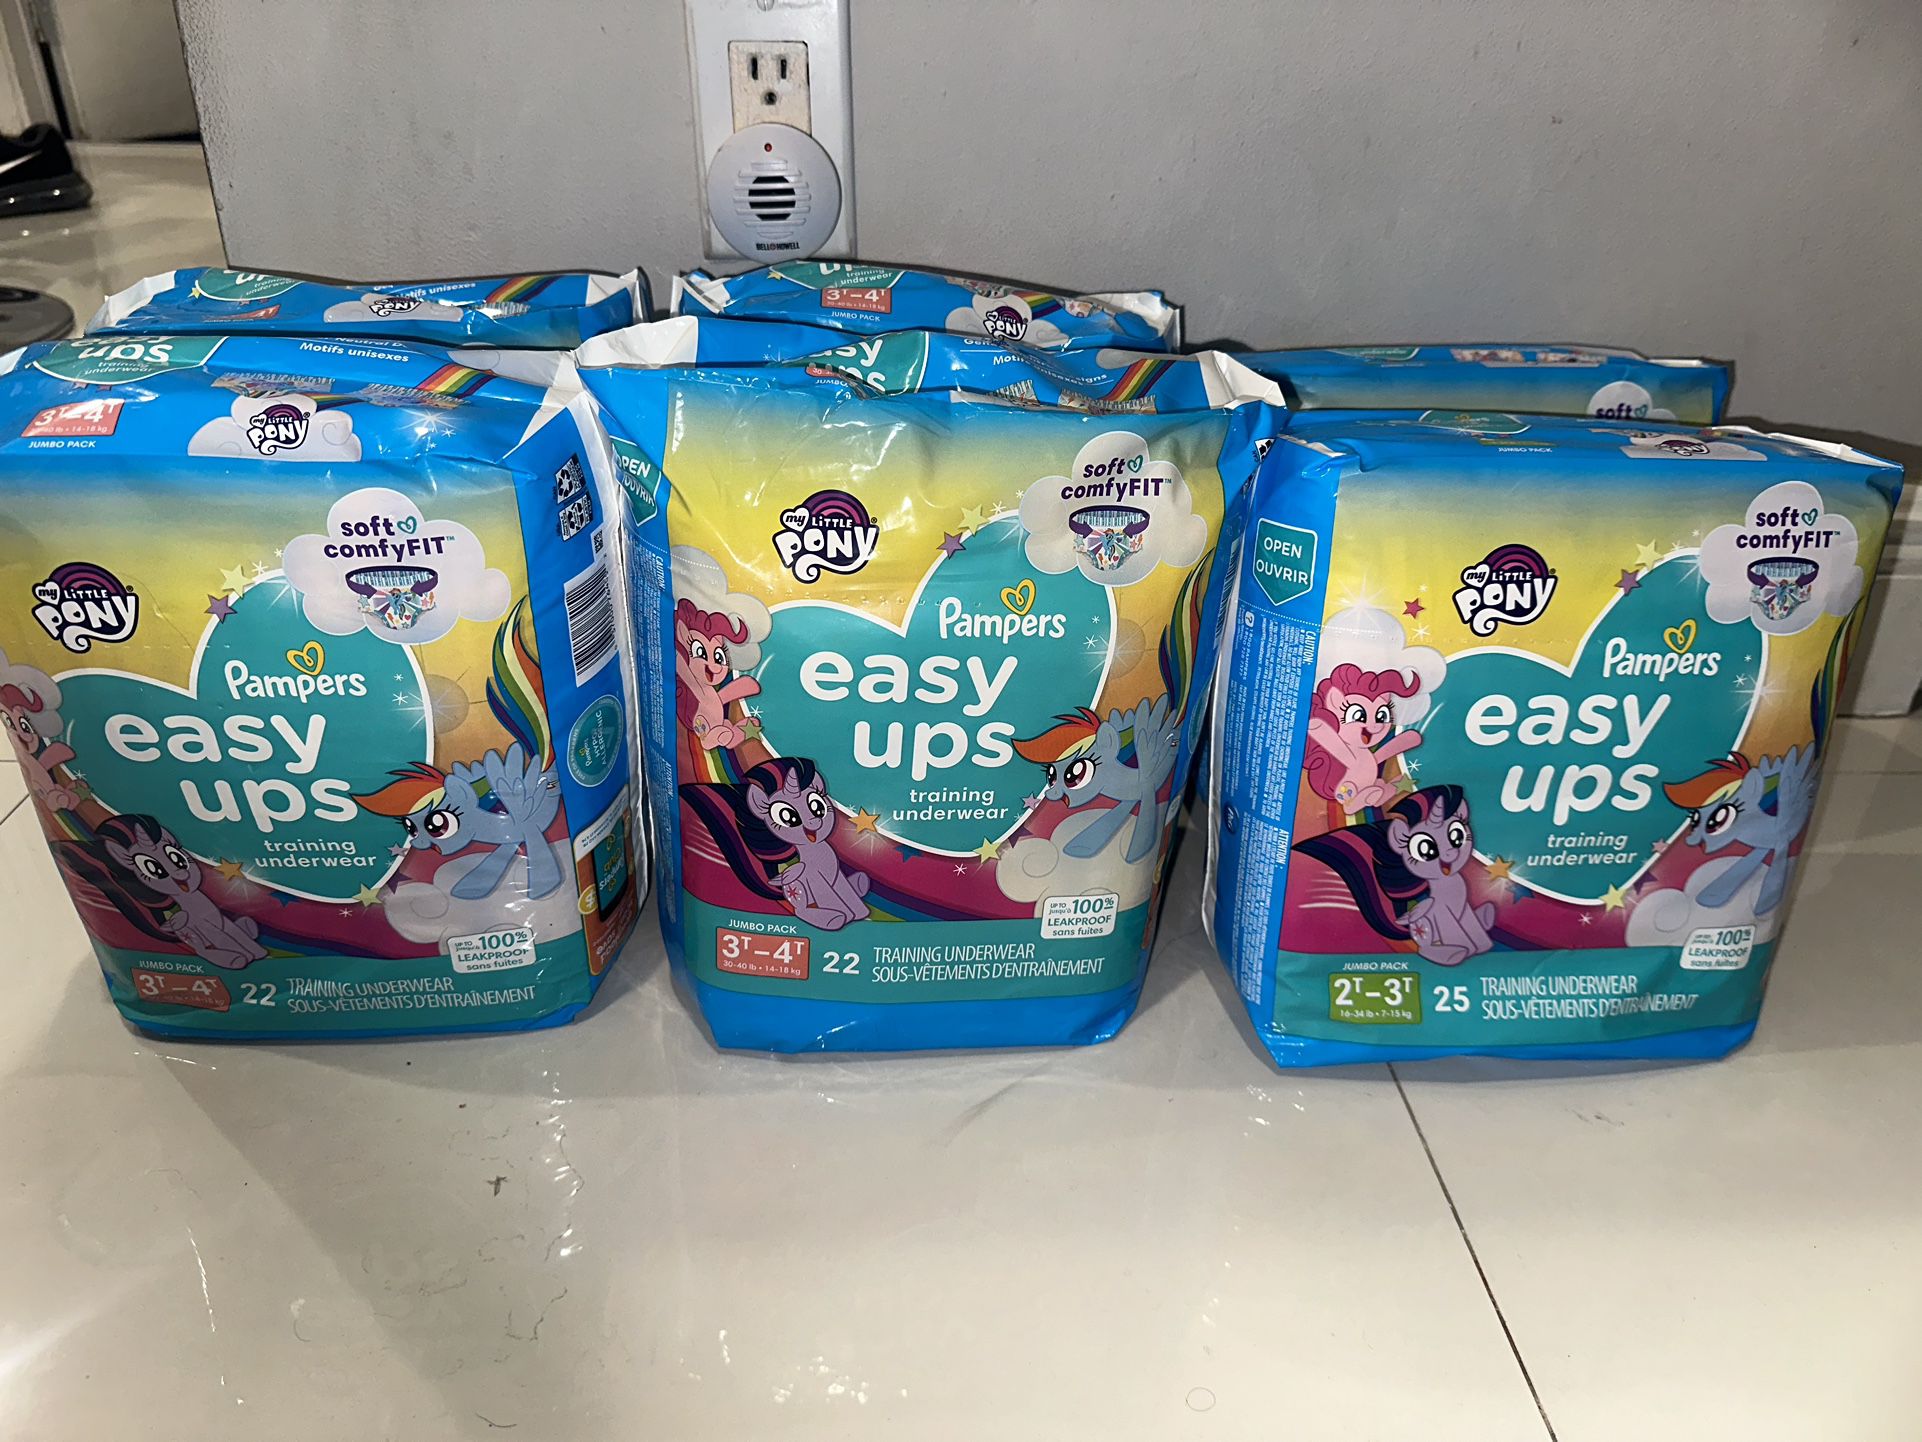 Pampers Easy-Ups Diapers Sizes 2T-3T and Sizes 3T-4T